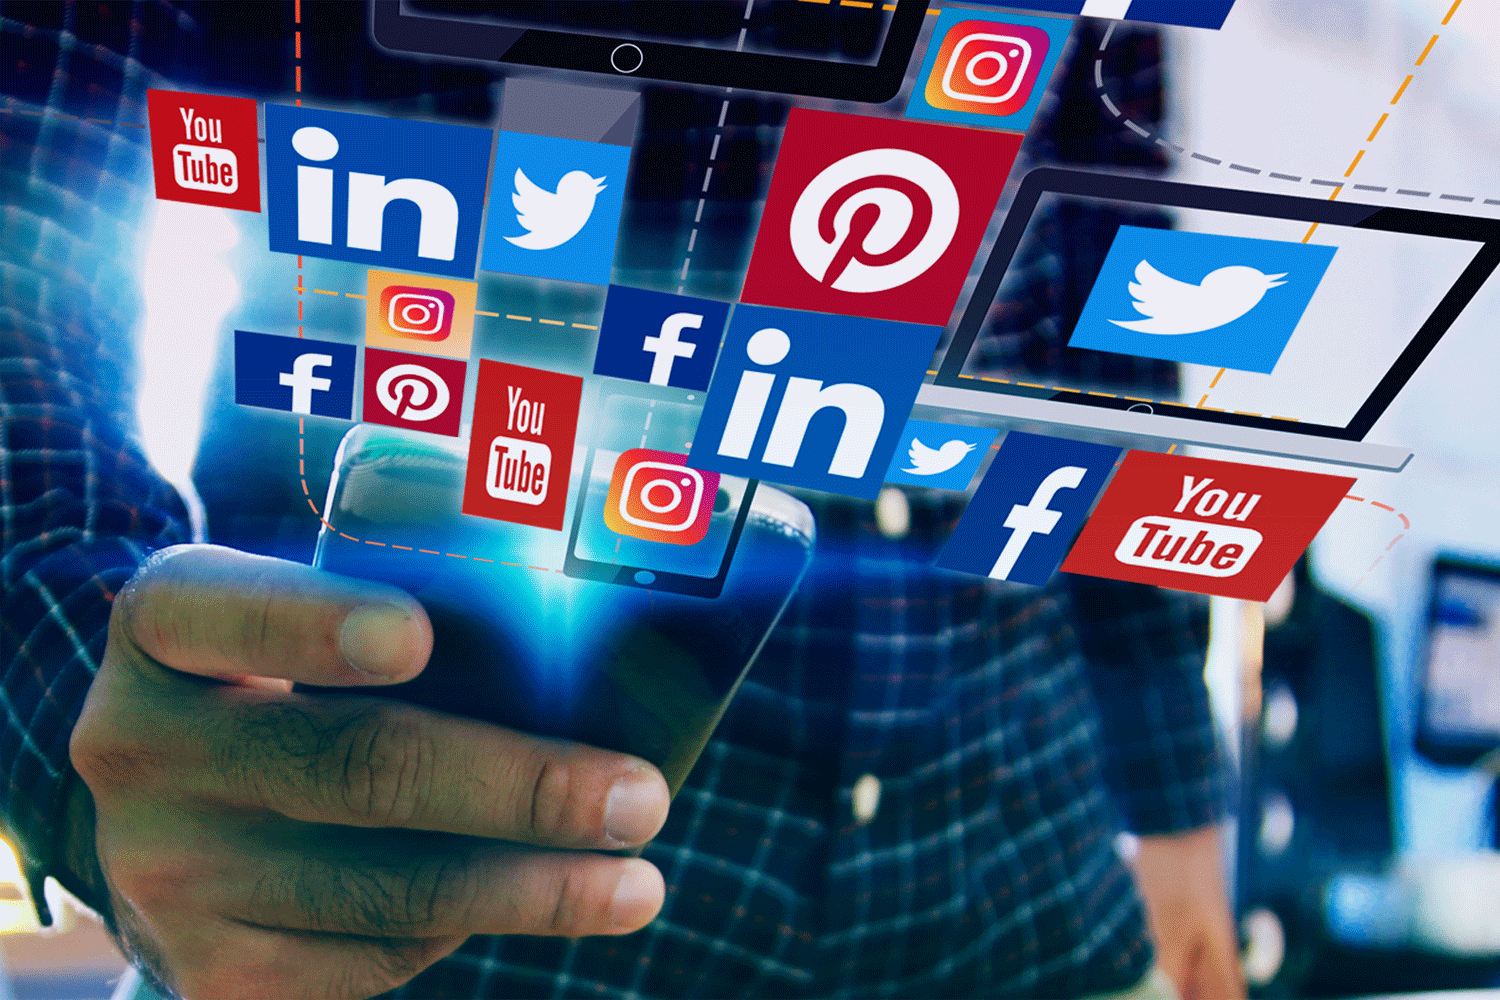 Instructions issued to FBR to bring social media platforms in tax net